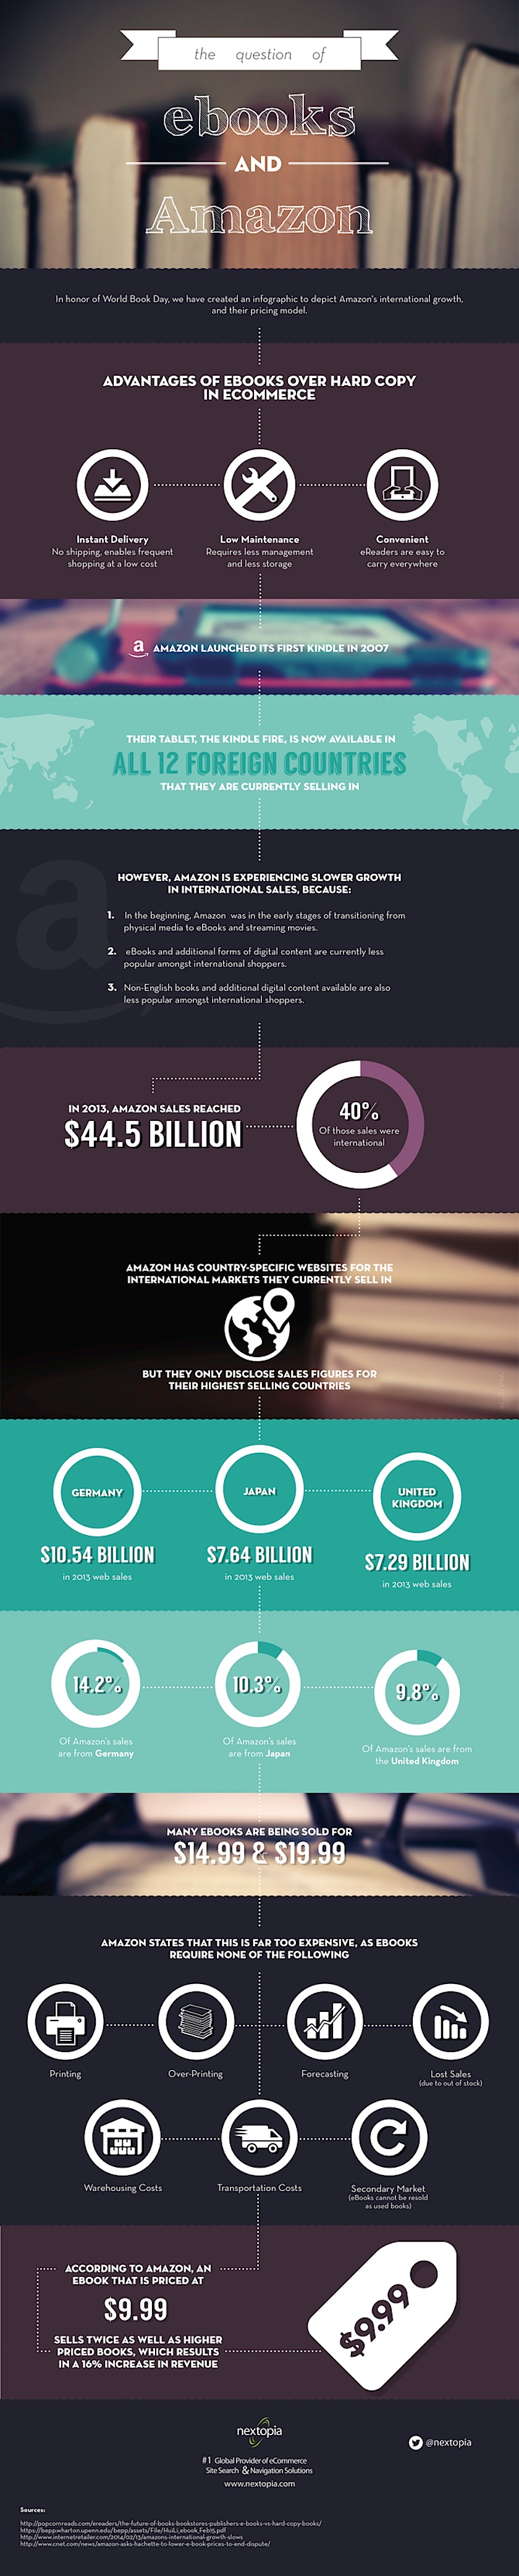 Amazon-influence-on-ebook-growth-infographic